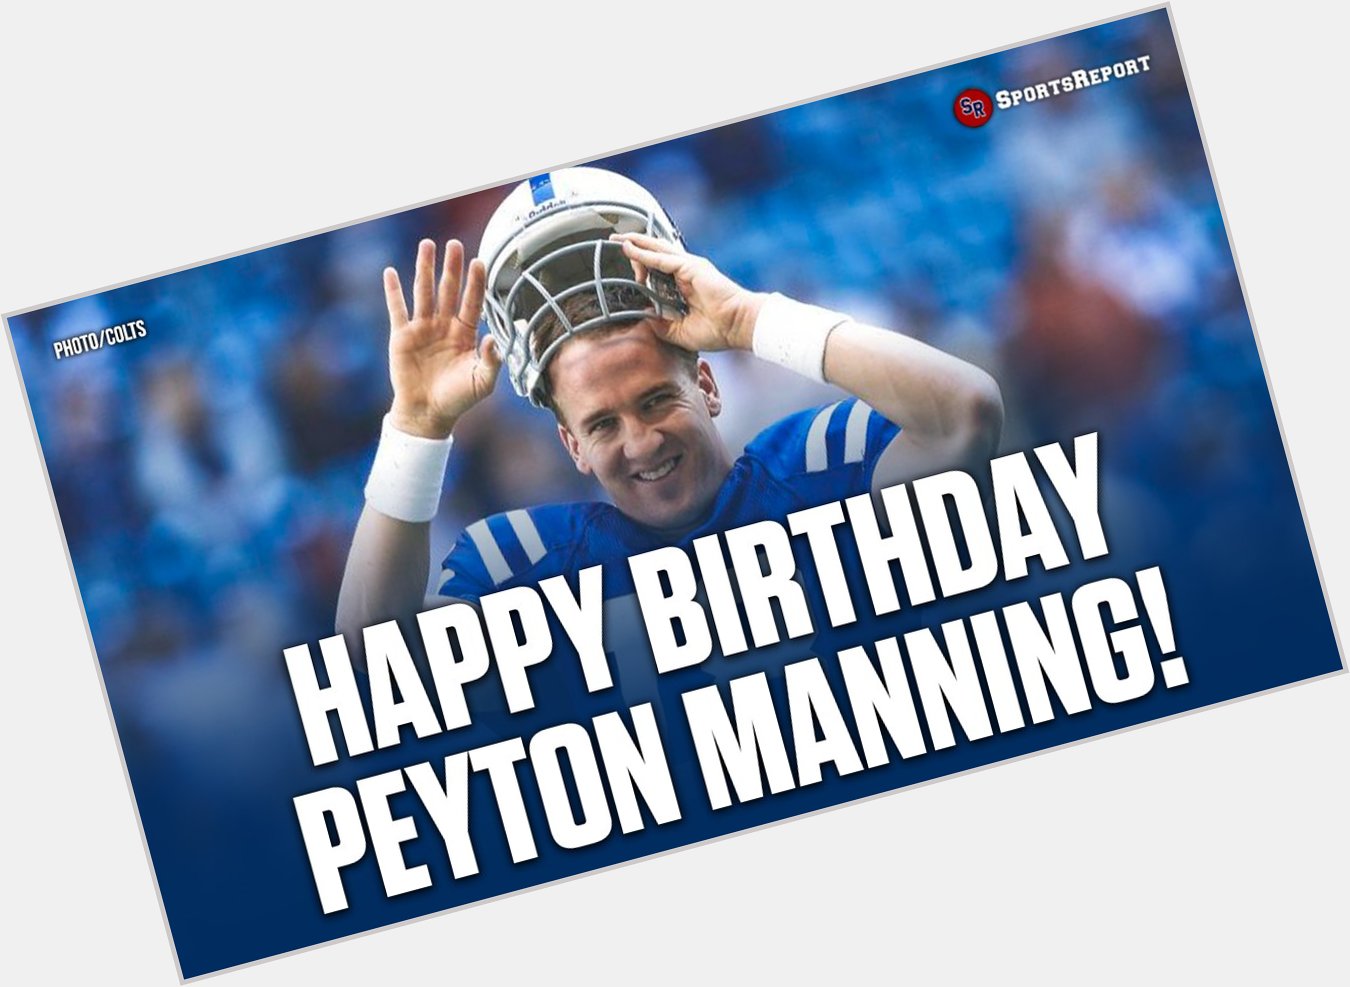  Fans, let\s wish the GOAT, Peyton Manning a Happy Birthday!! 